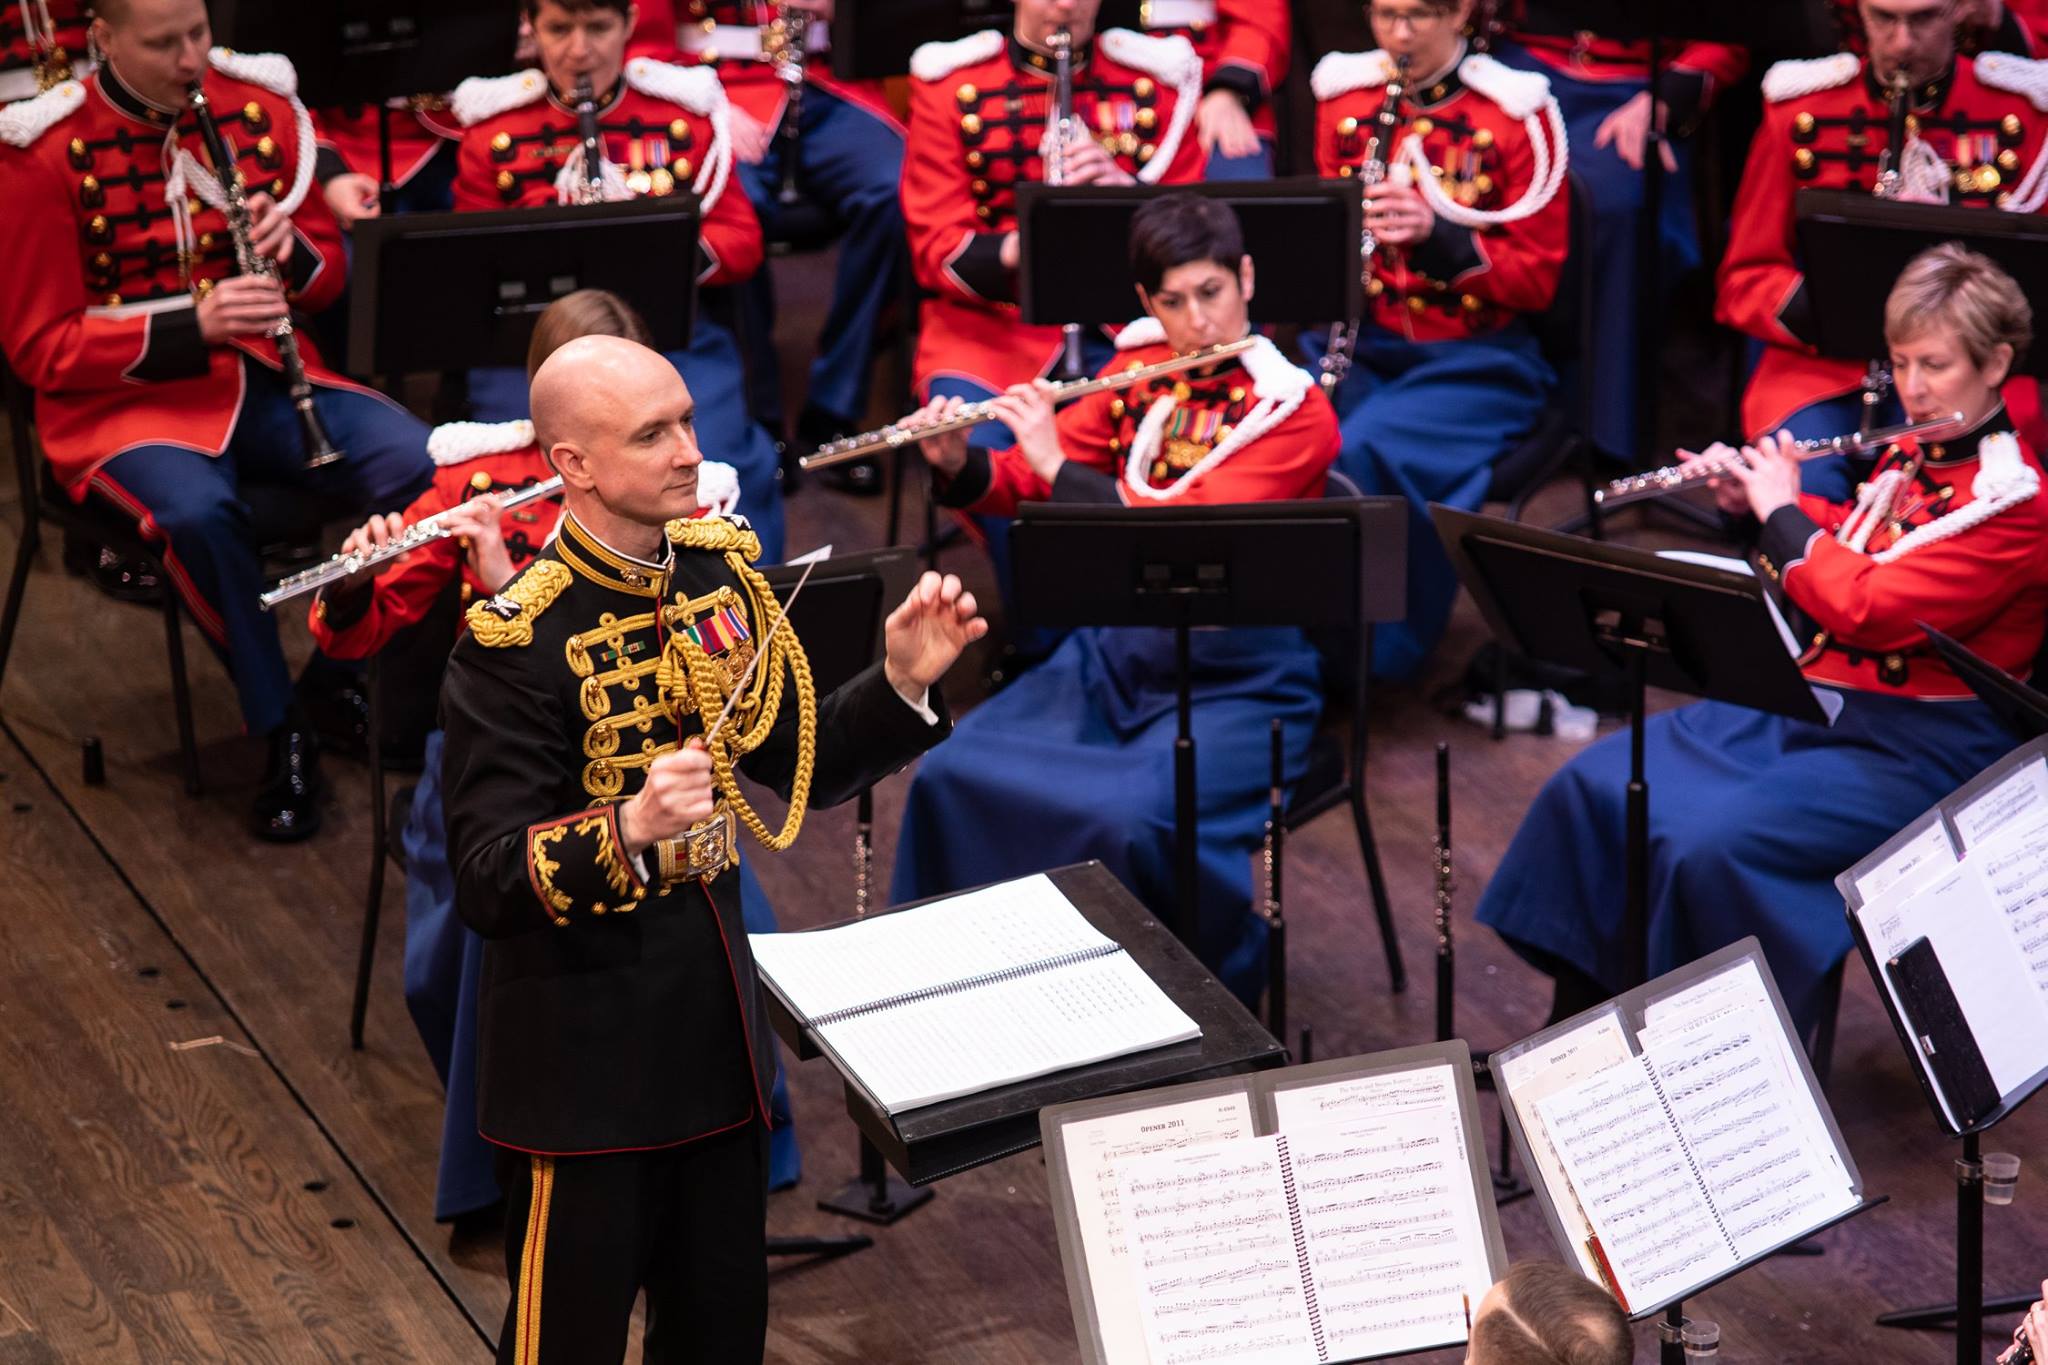 Col. Jason K. Fettig will conduct the U.S. Marine Band during an Oct. 17 performance at San Joaquin Delta College.